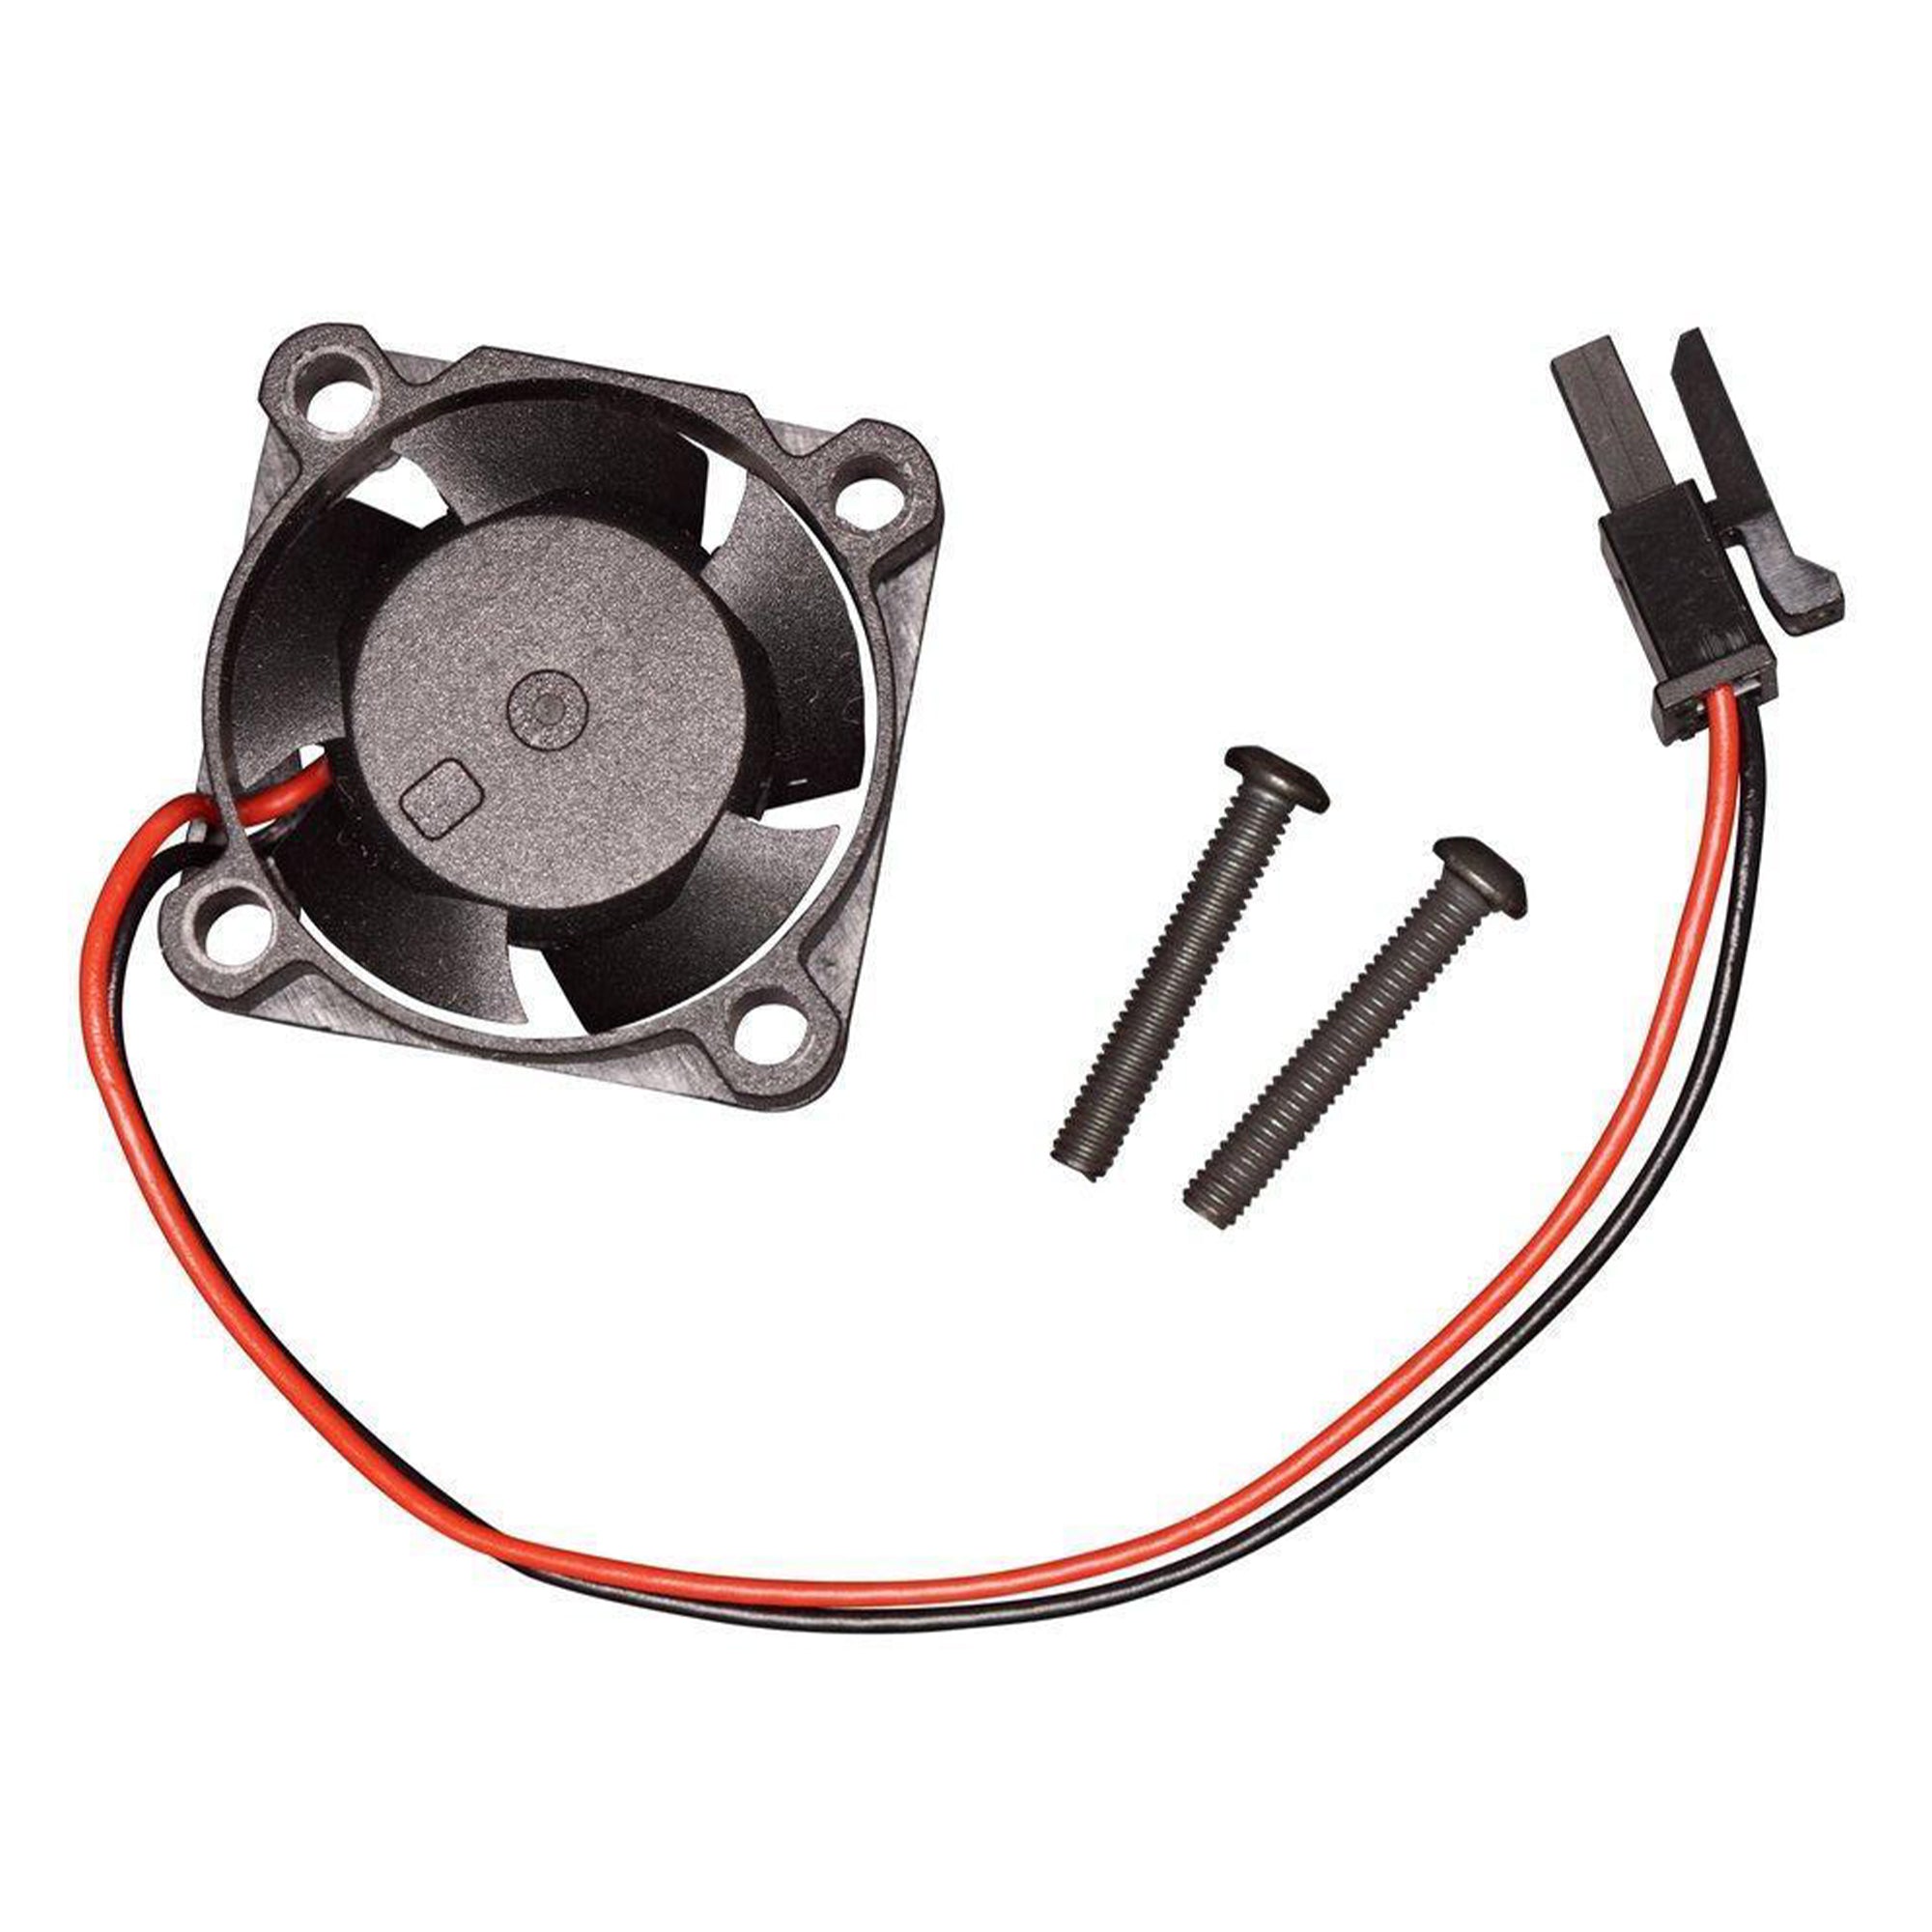 Slice Engineering 12v Fan for Mosquito Hotend